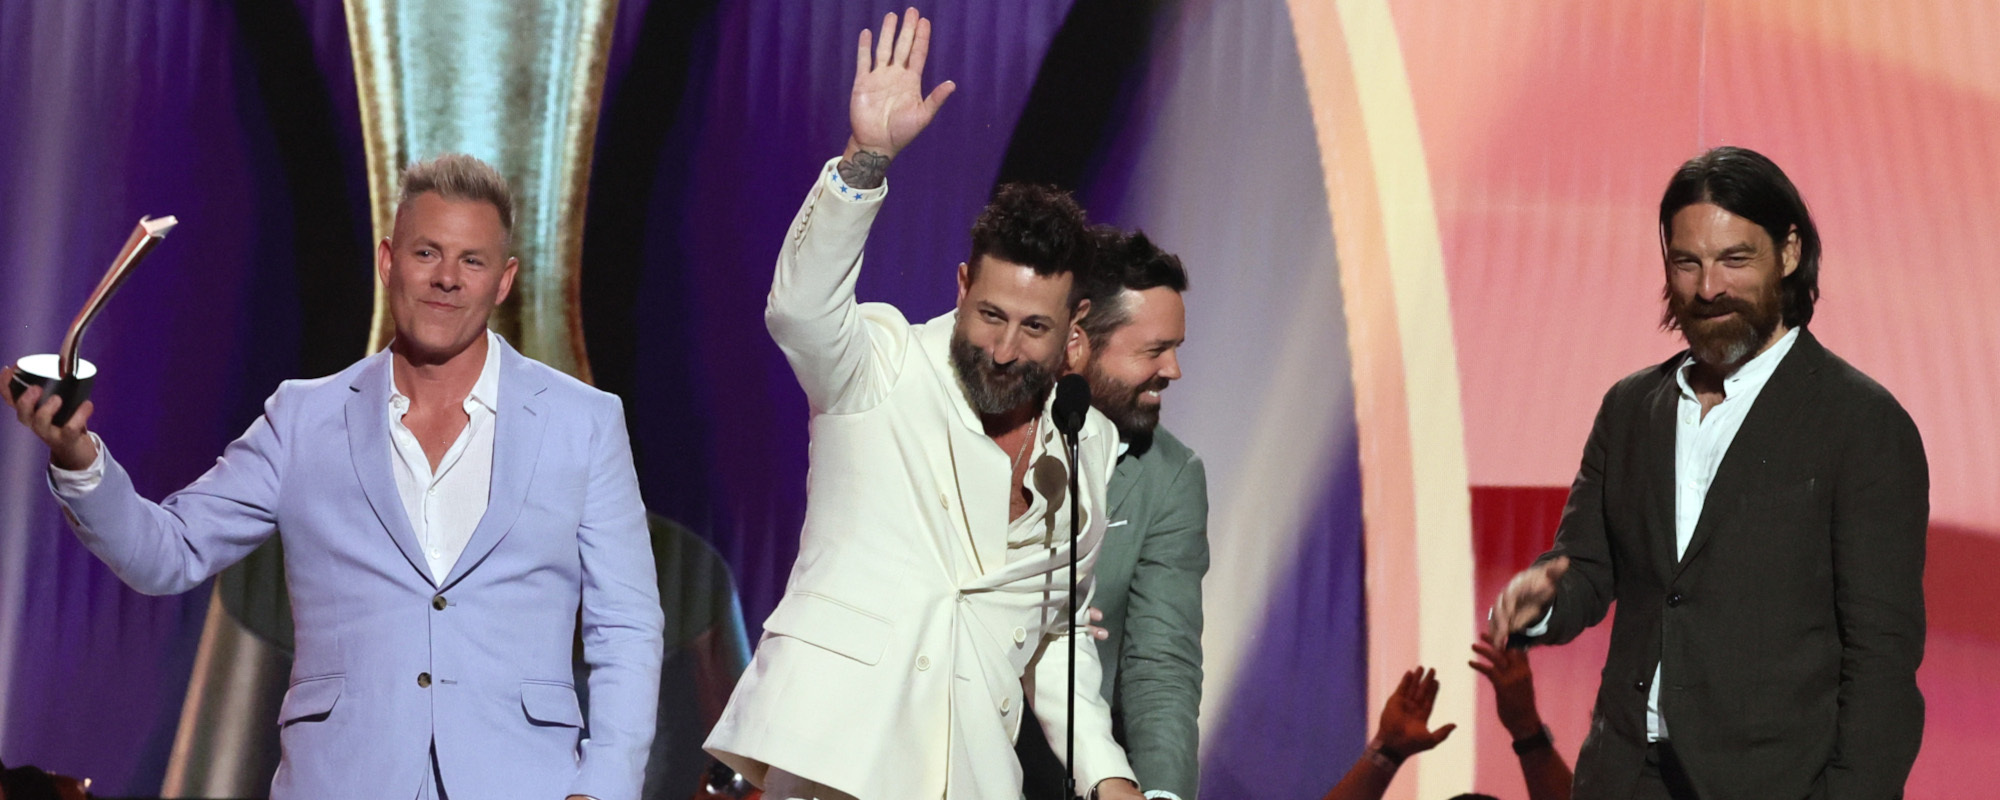 Old Dominion Takes Home Group of the Year at 2023 ACM Awards